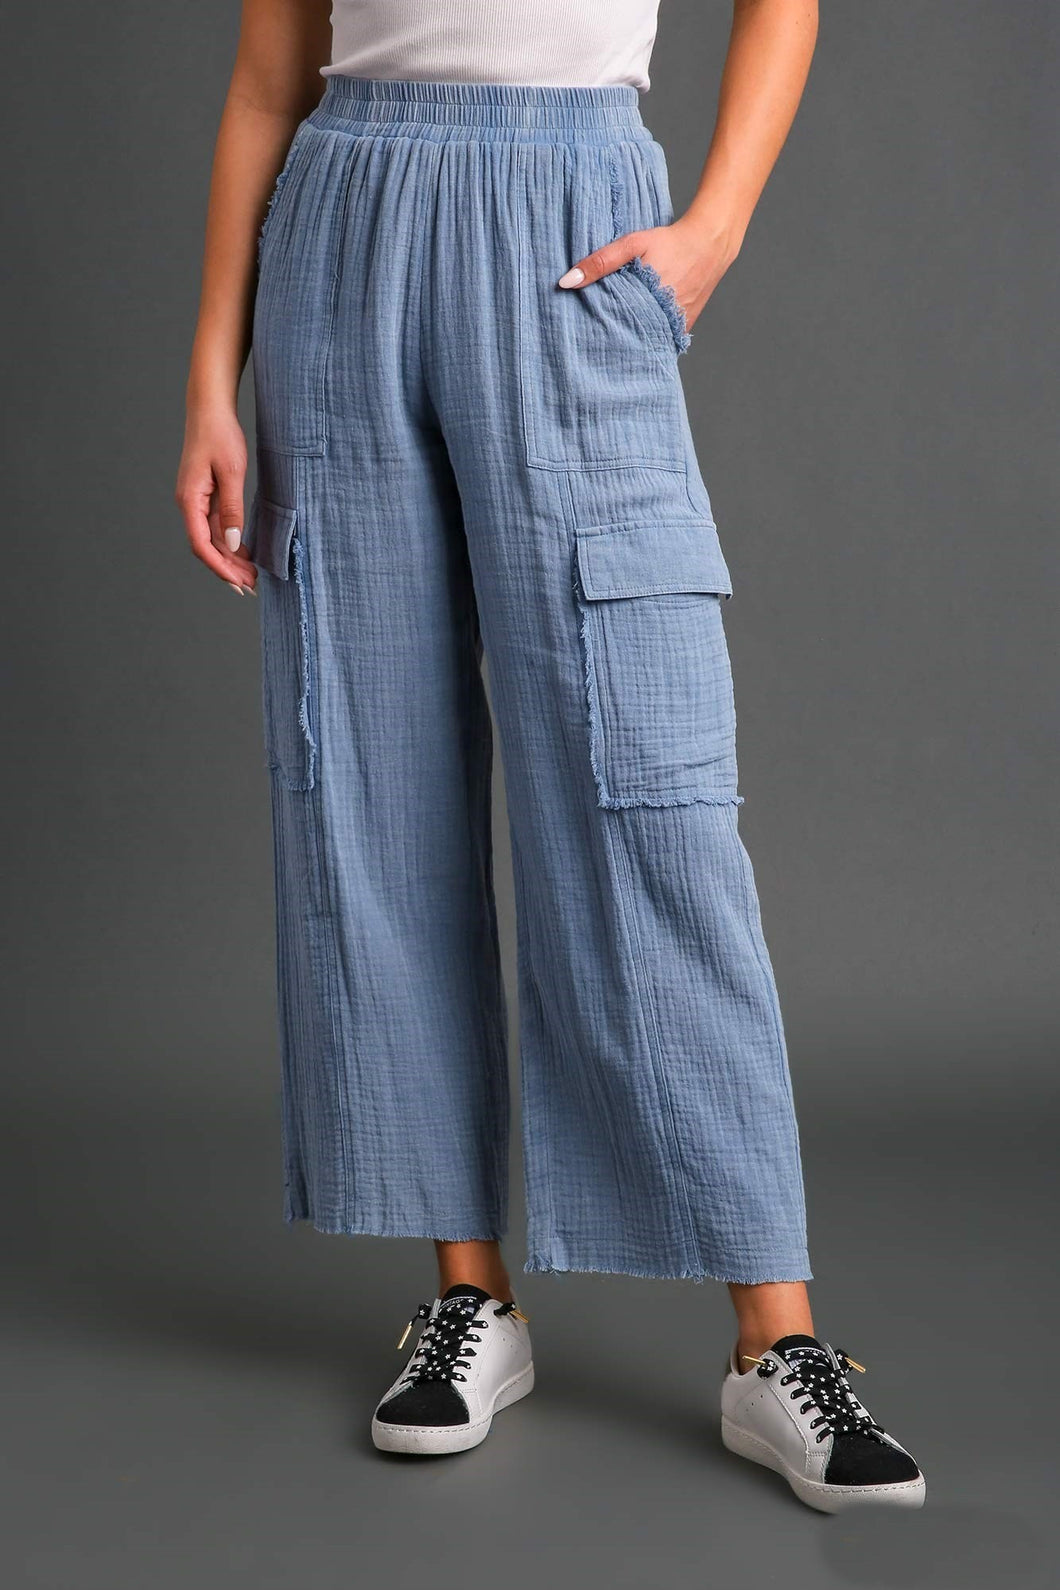 Umgee Mineral Washed Cargo Pants in Denim Pants Umgee   